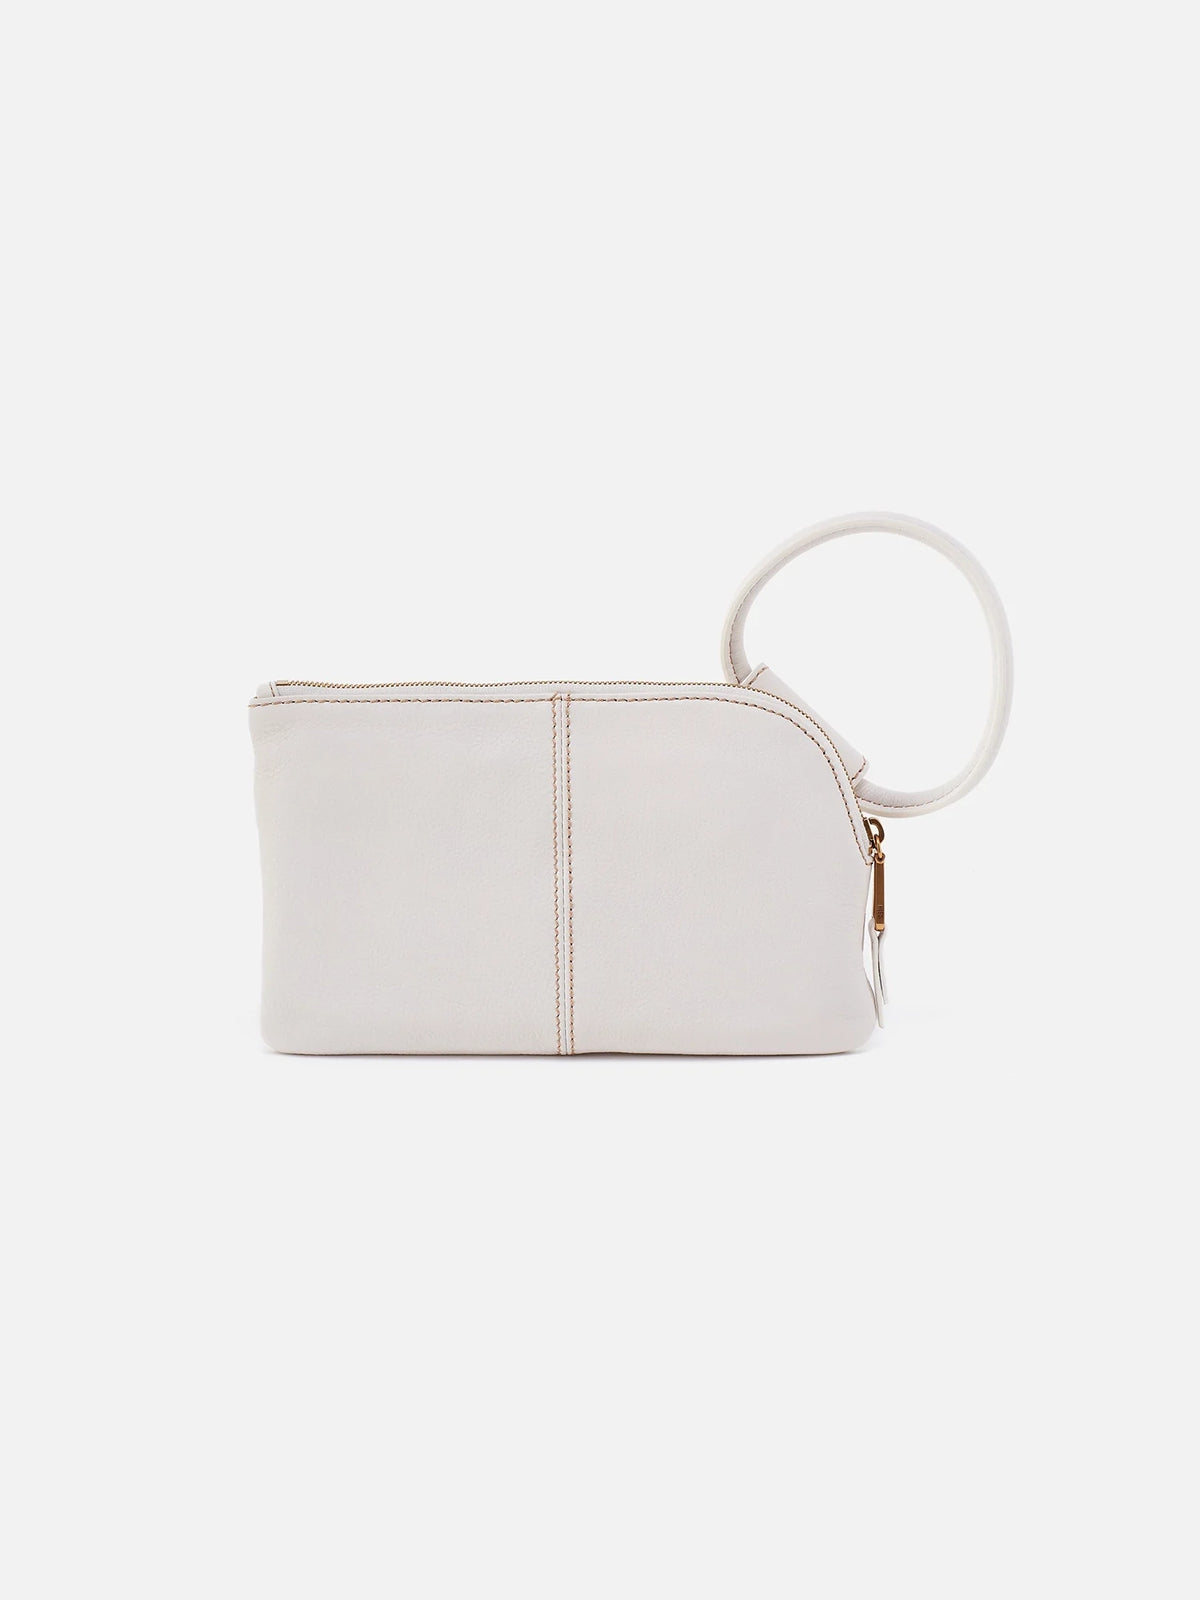 hobo sable pebbled leather stitch wristlet in white